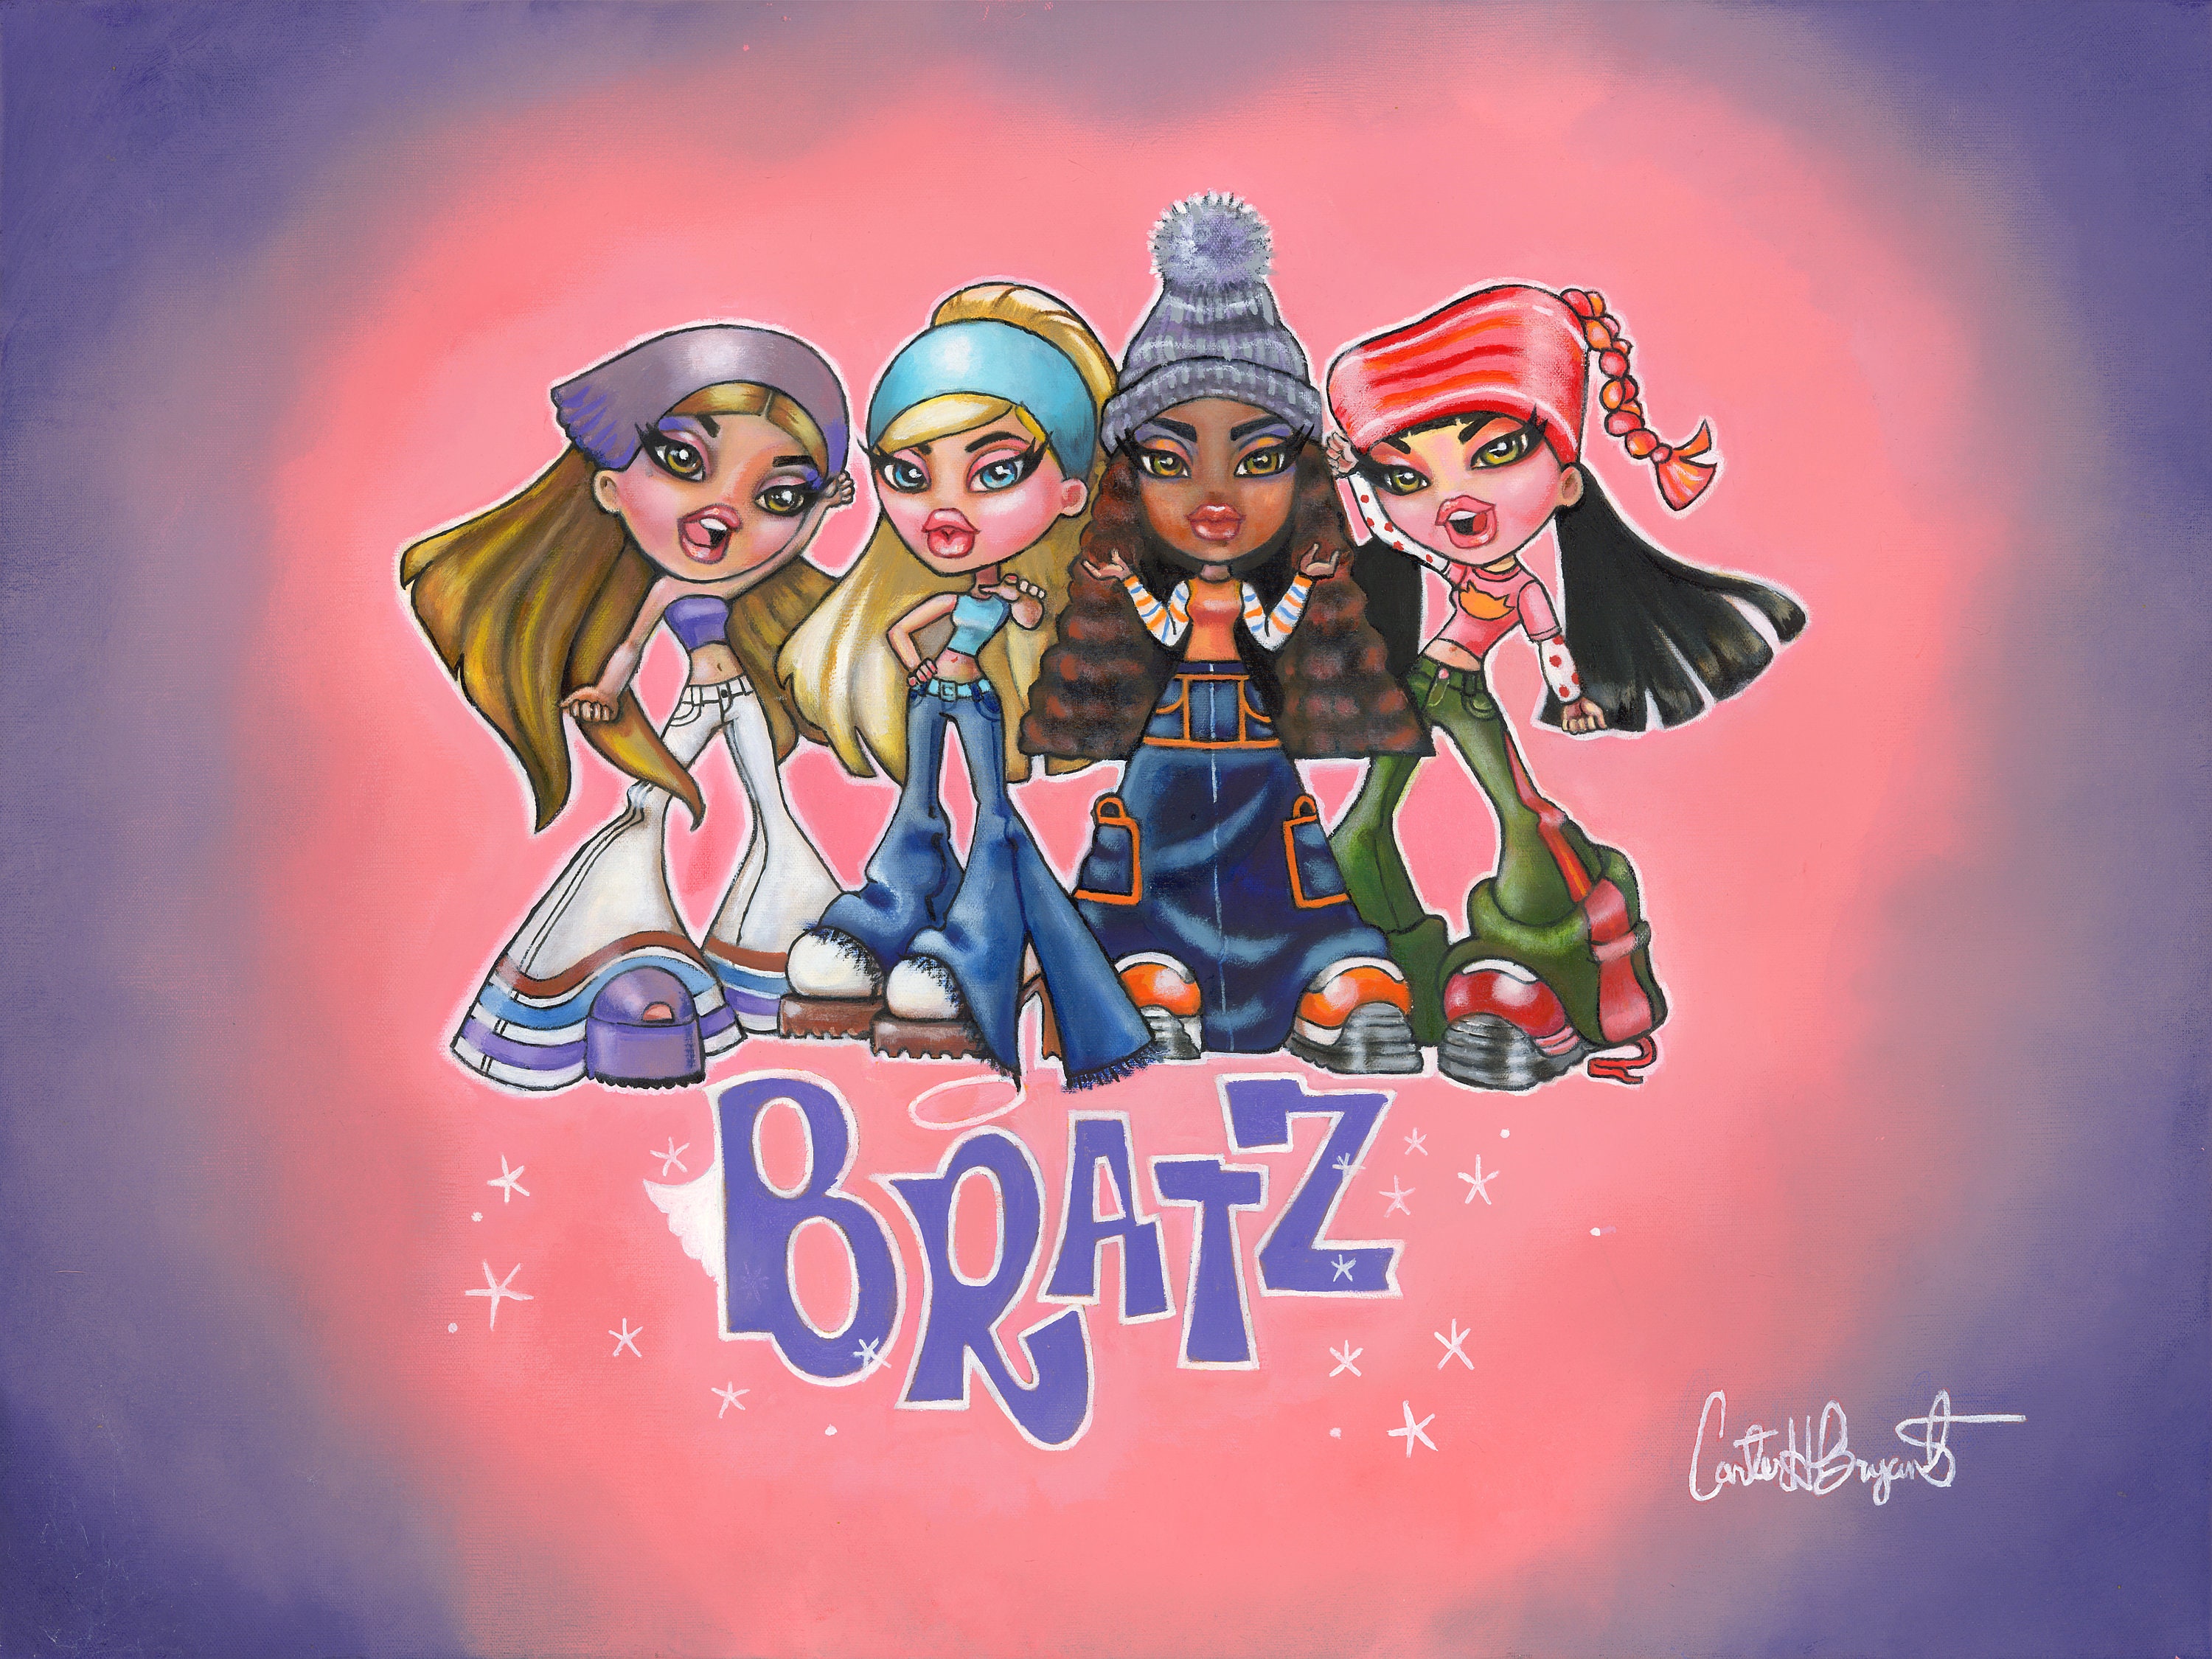 Bratz OG! The original fab 4! Autographed Glossy print, signed by Bratz  Creator Carter Bryant. A new work painted by Carter Bryant.